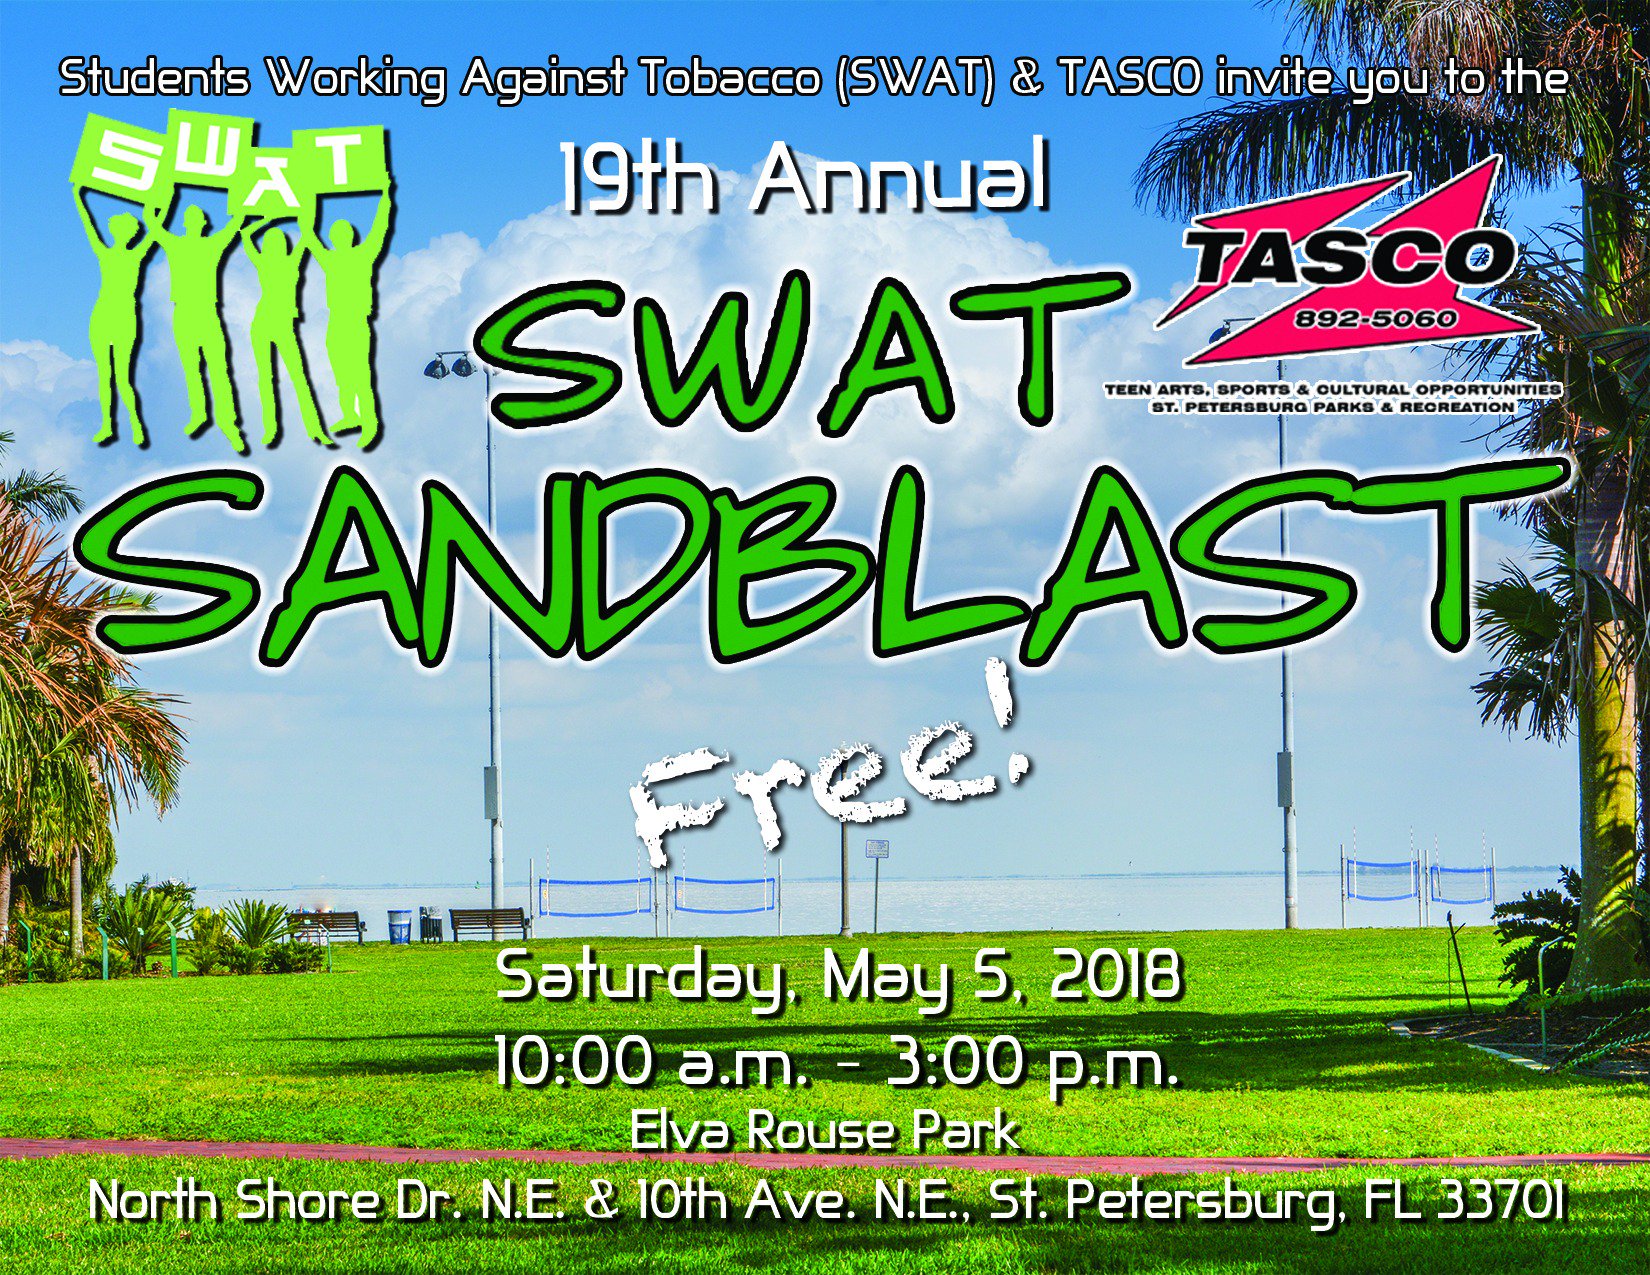 Students Working Against Tobacc (STAW) & TASCO invite you to the 19th Annual SWAT SANDBLAST - Free! - Saturday May 5, 2018 10:00AM - 3:00PM - Elva Rouse Park